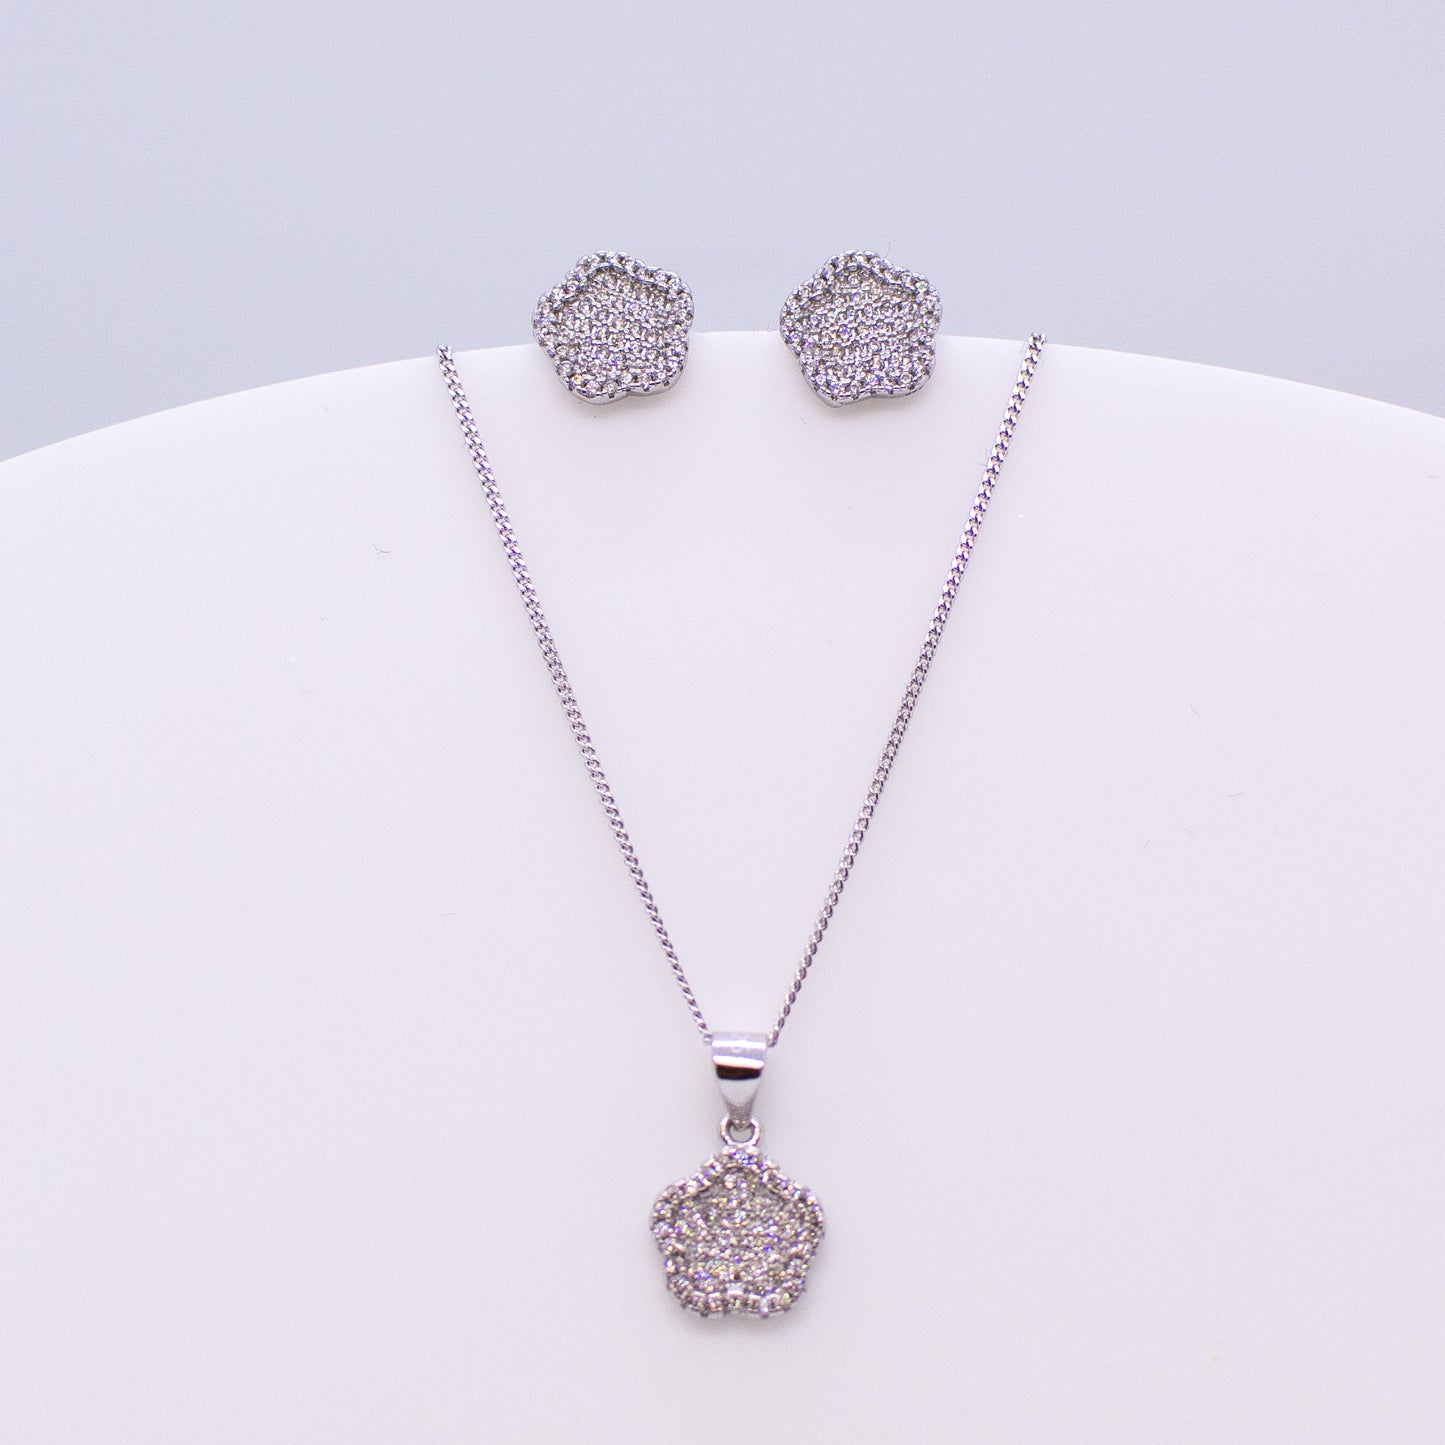 These sterling silver floral stud earrings set with glittering cubic zirconia stones accompanied by the matching necklace are the perfect addition to any outfit. Product details: Product materials: 925 sterling silver, cubic zirconia Chain length: 44cm inch fine diamond cut curb chain